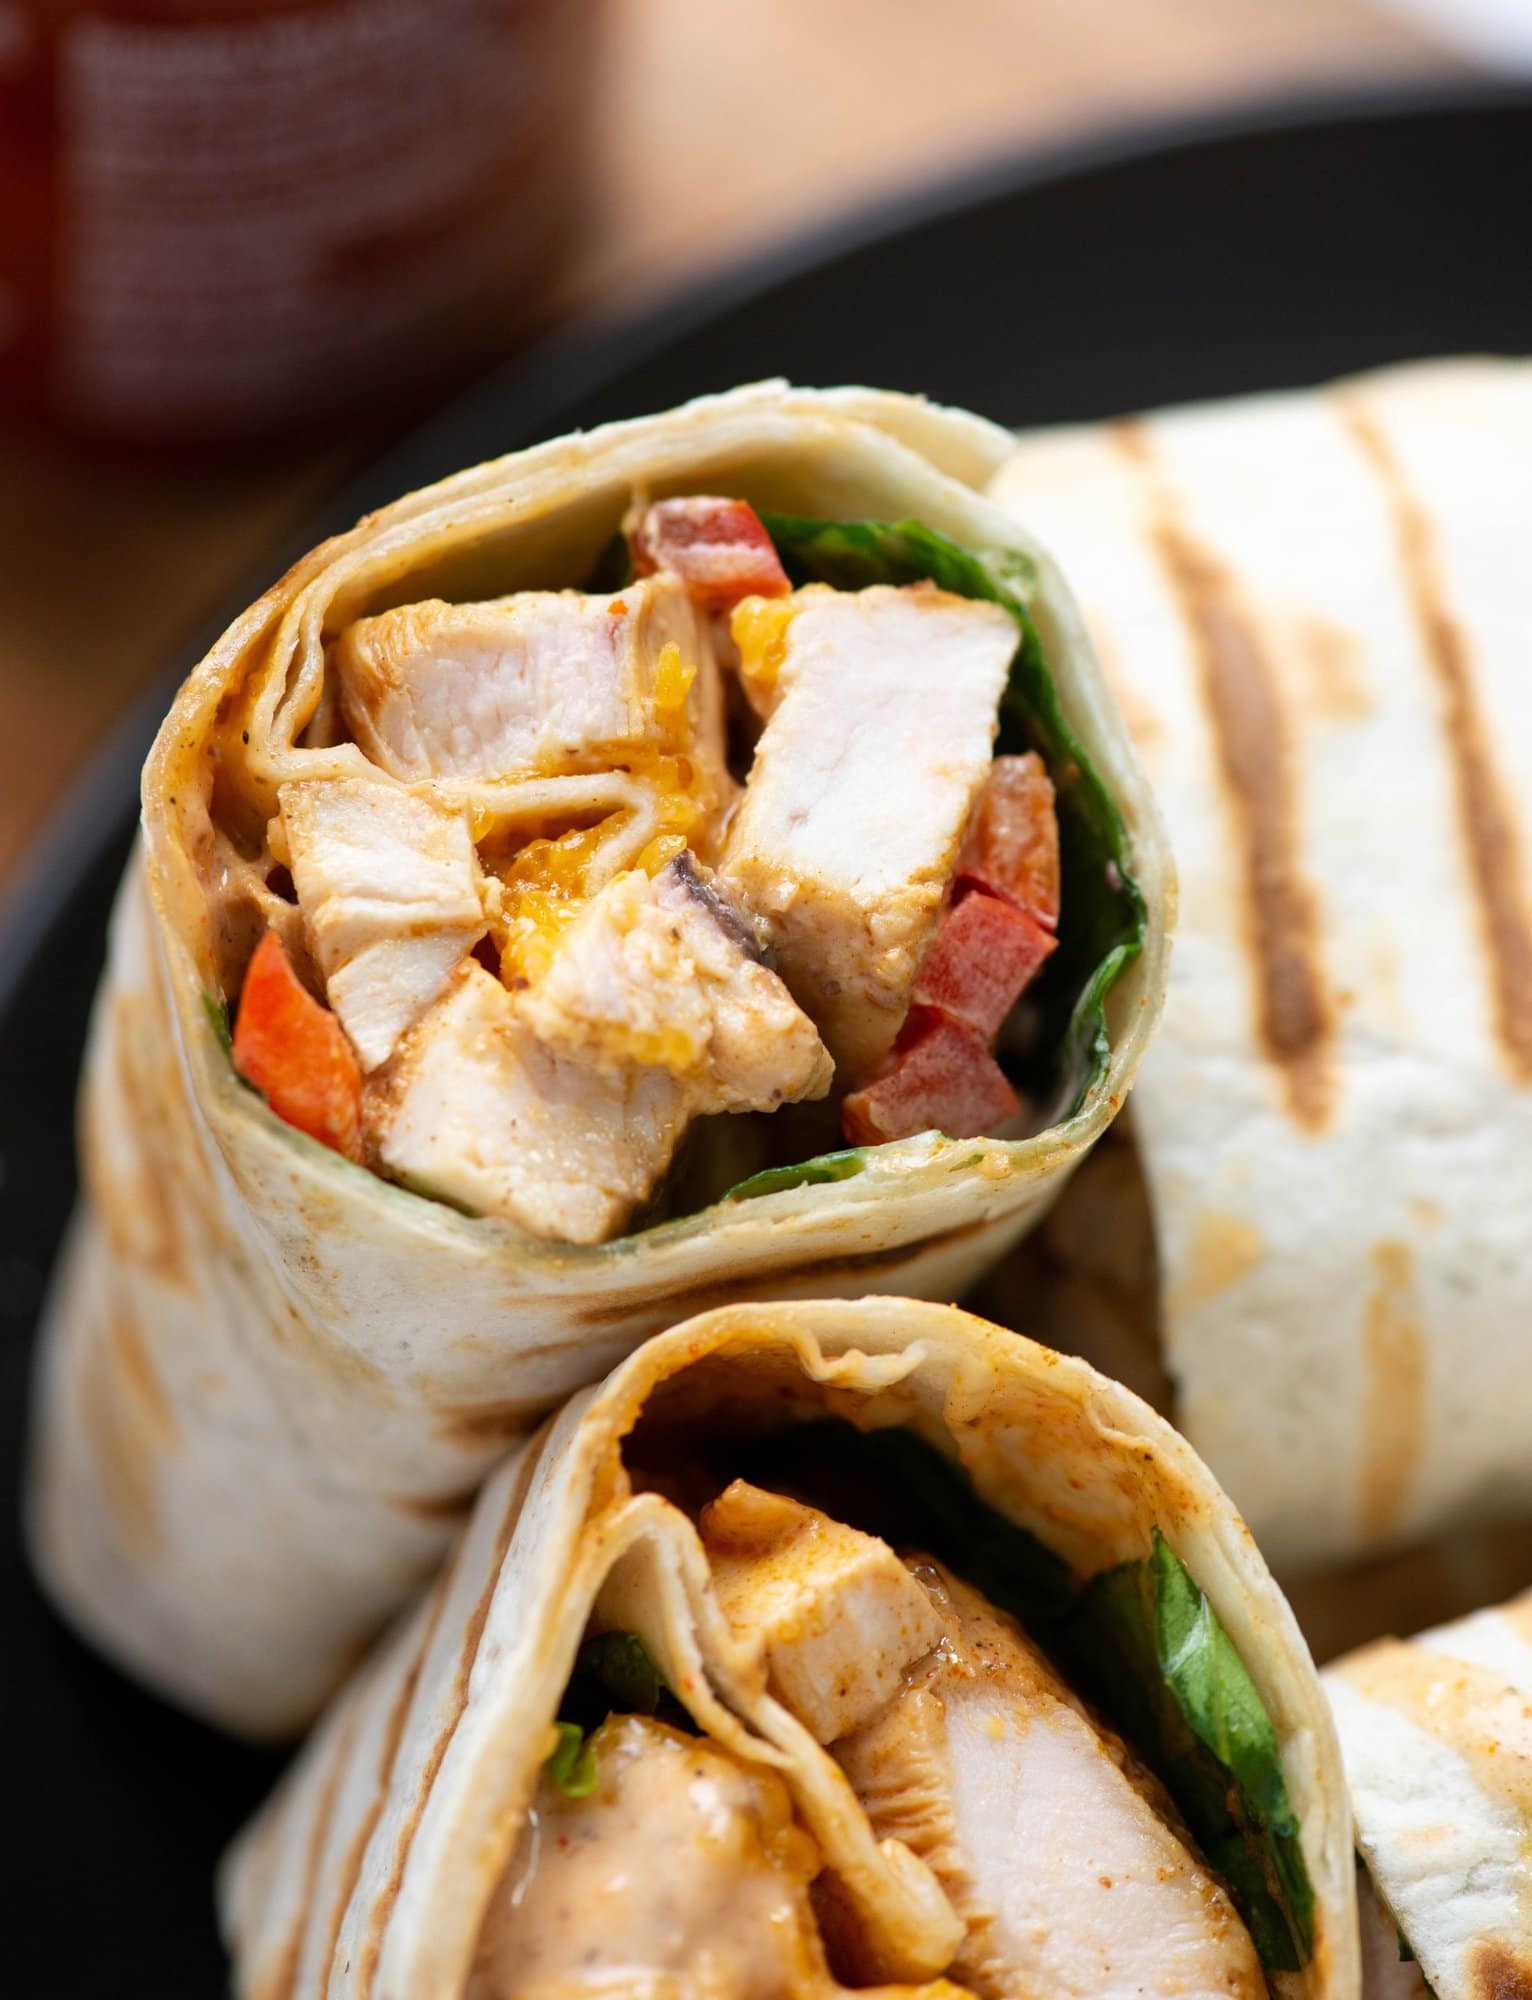 Grilled Chicken Wrap - The flavours of kitchen